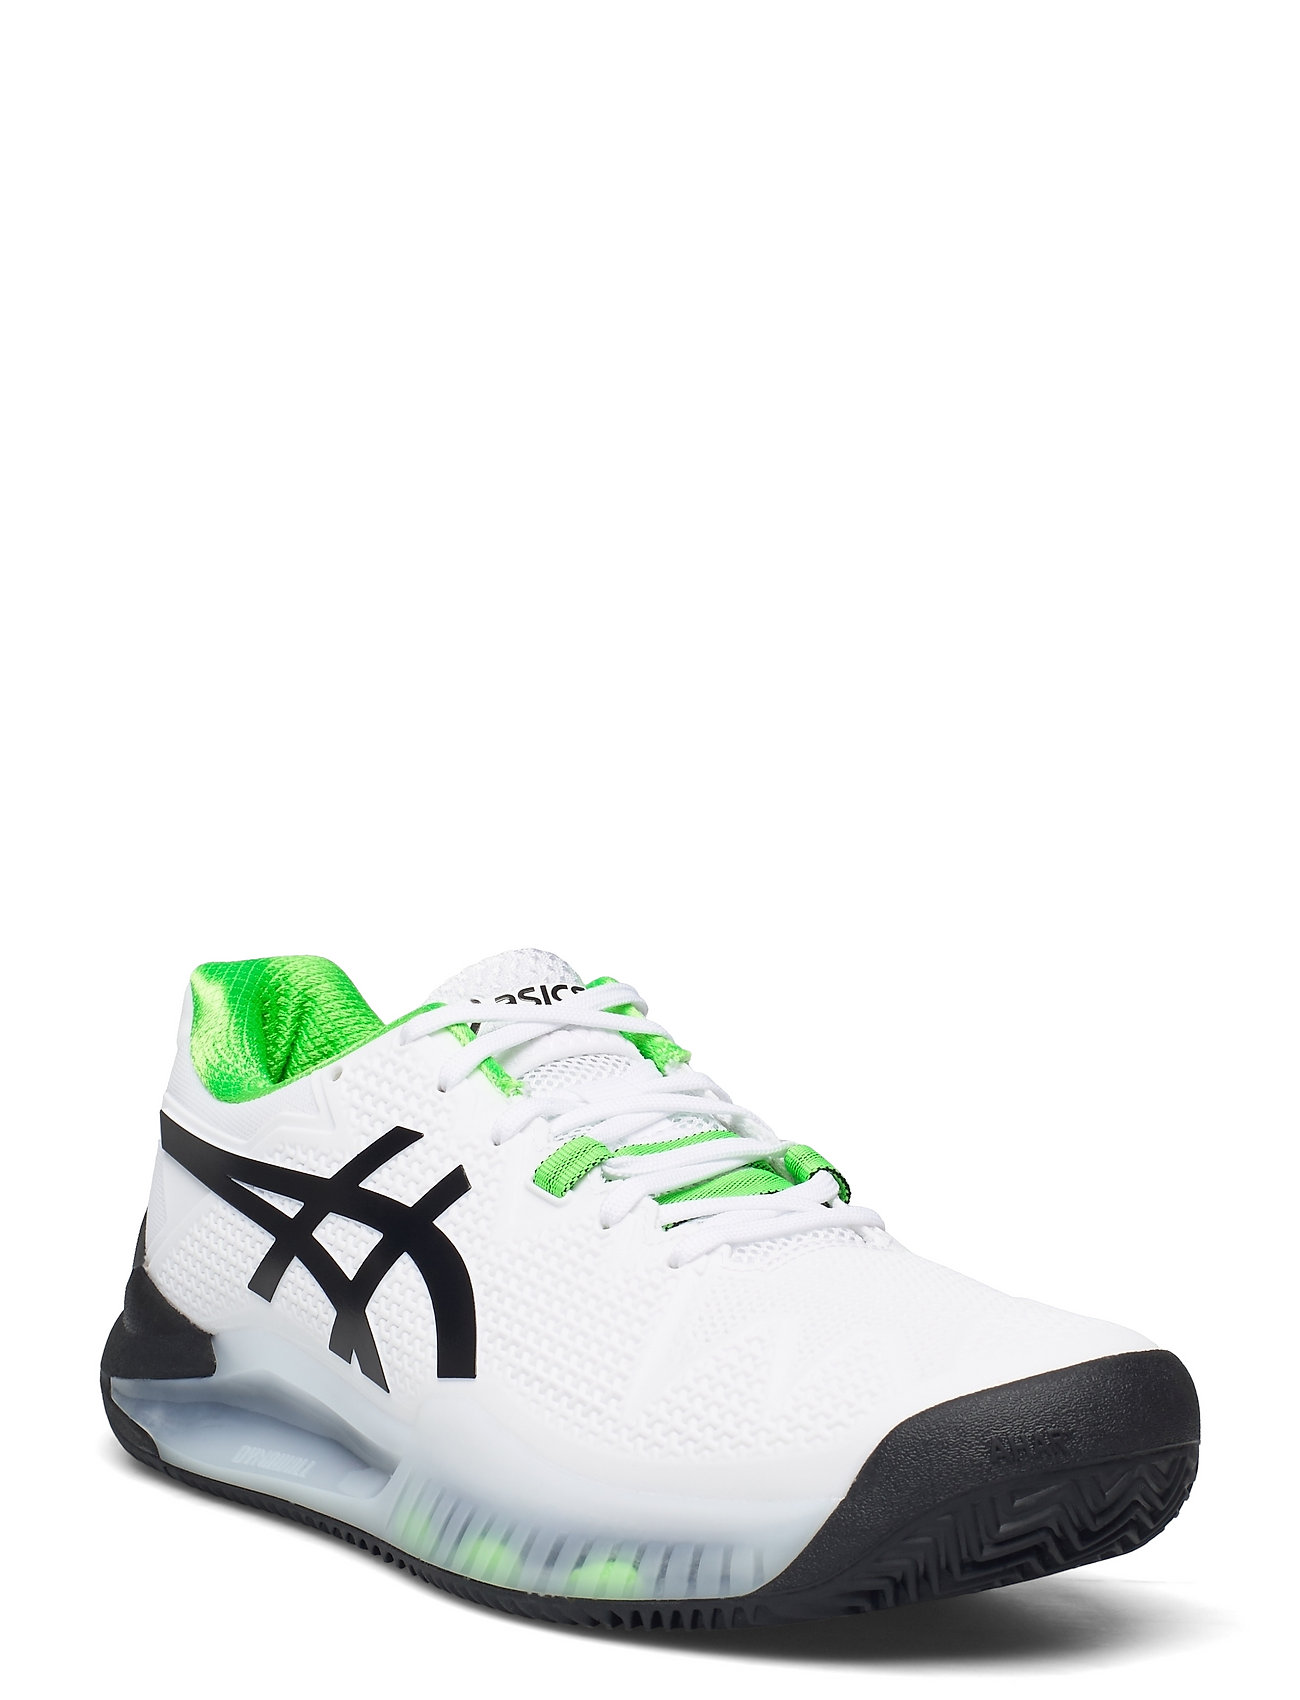 Gel-Resolution 8 Clay Shoes Sport Shoes Racketsports Shoes Valkoinen Asics